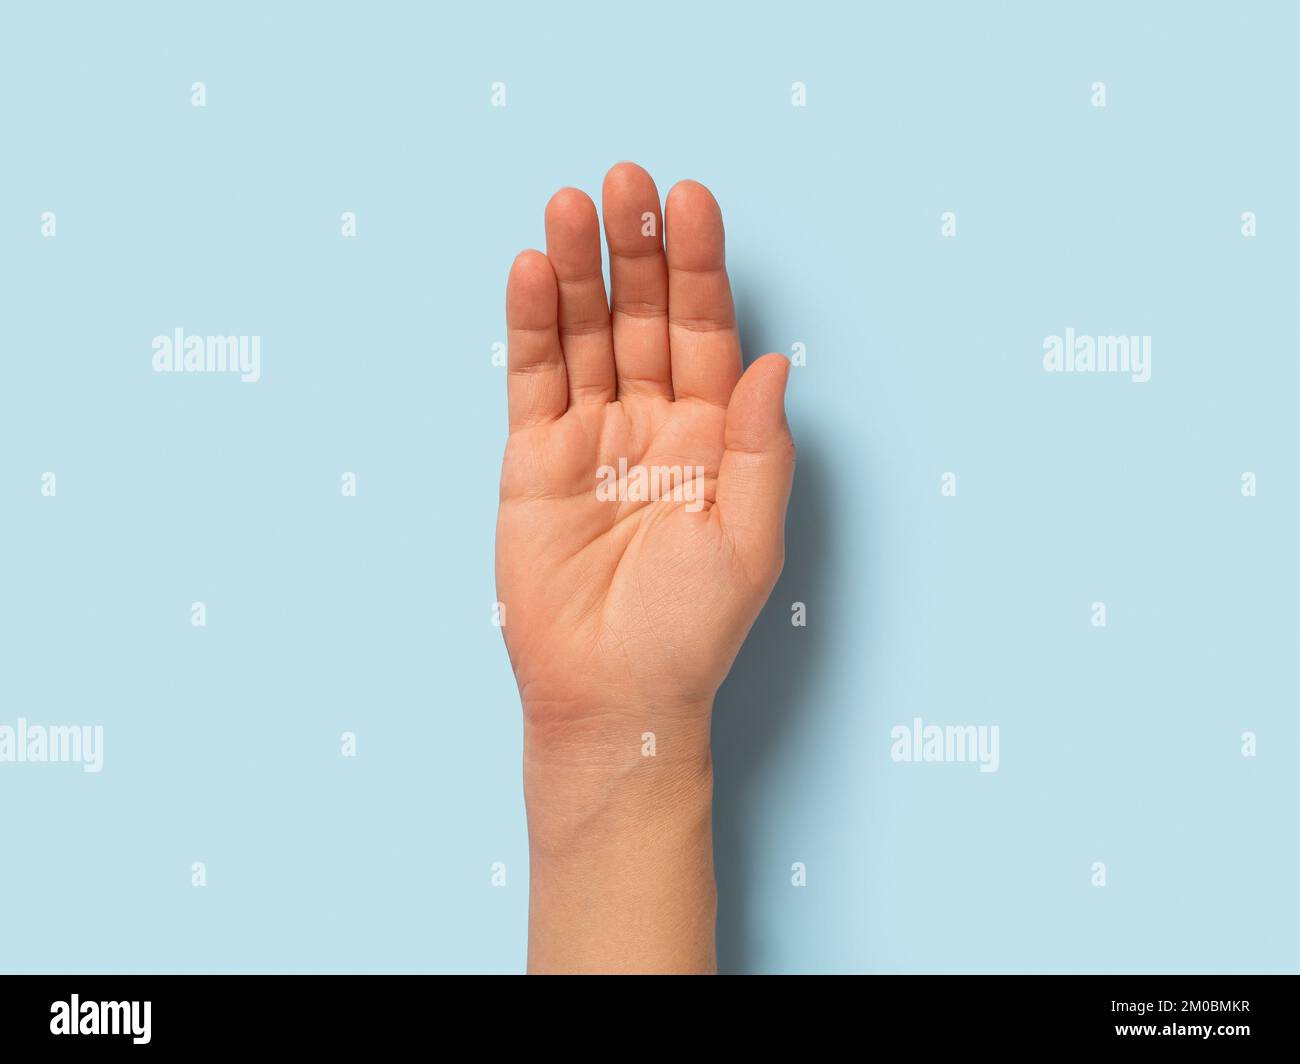 Empty hand palm of caucasian woman over pastel blue background. Open hand gesture close-up. Adult female person right hand macro. Body parts concept. Stock Photo